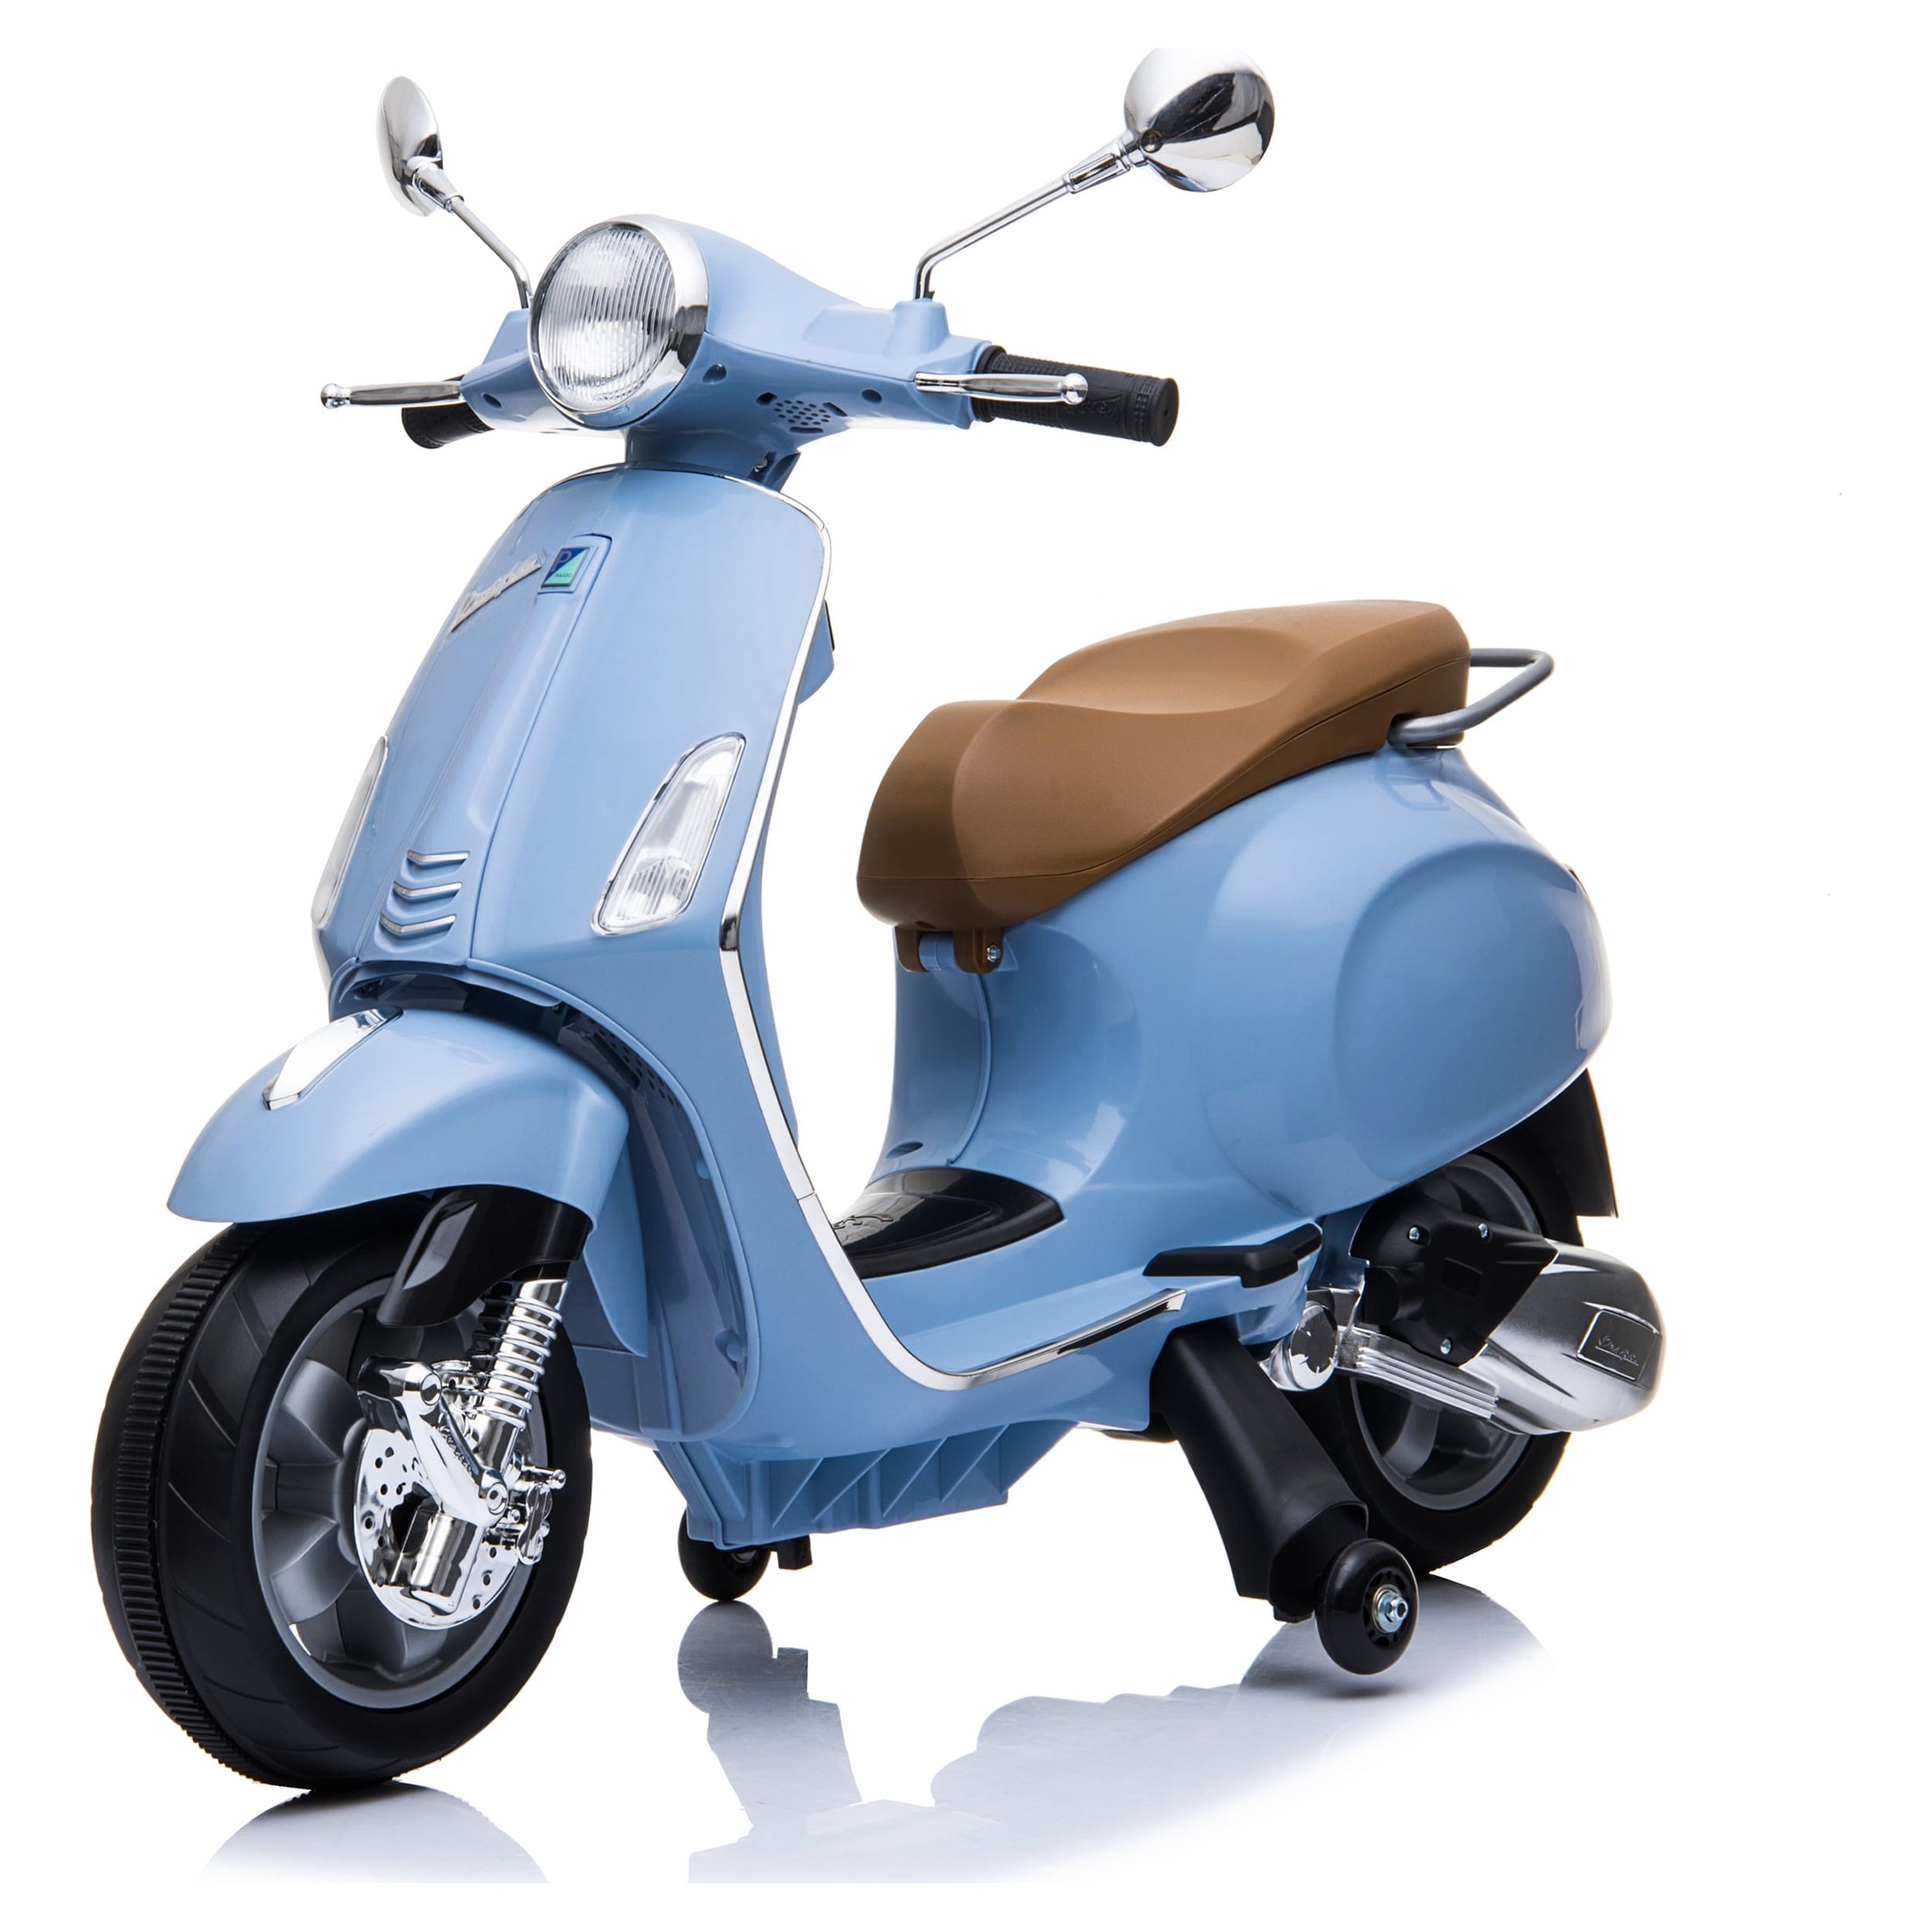 Blazin' Wheels 12V Vespa GTS Super Sport Battery Operated Rideon Scooter - Unisex Toy - image 1 of 9